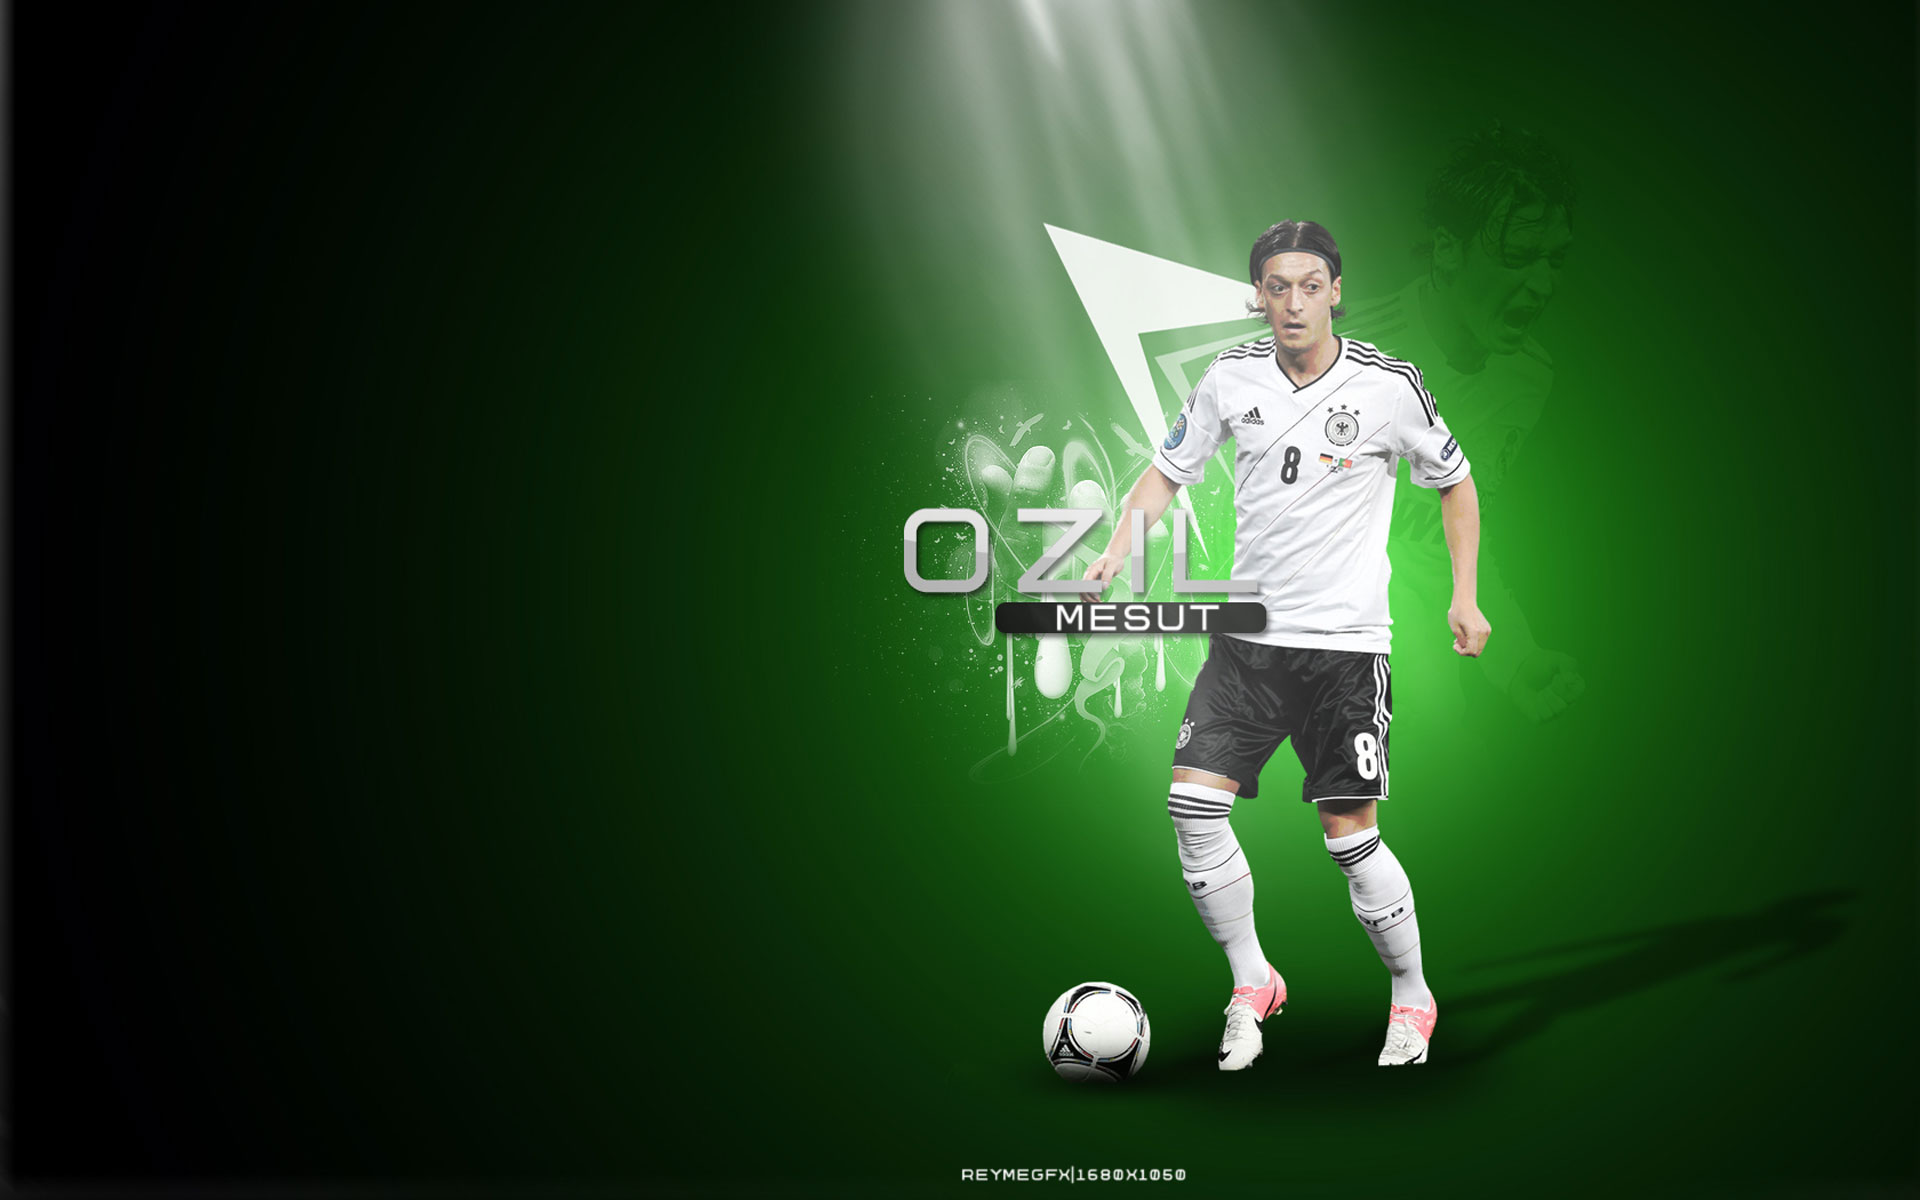 Mesut Ozil Wallpaper For This Widescreen